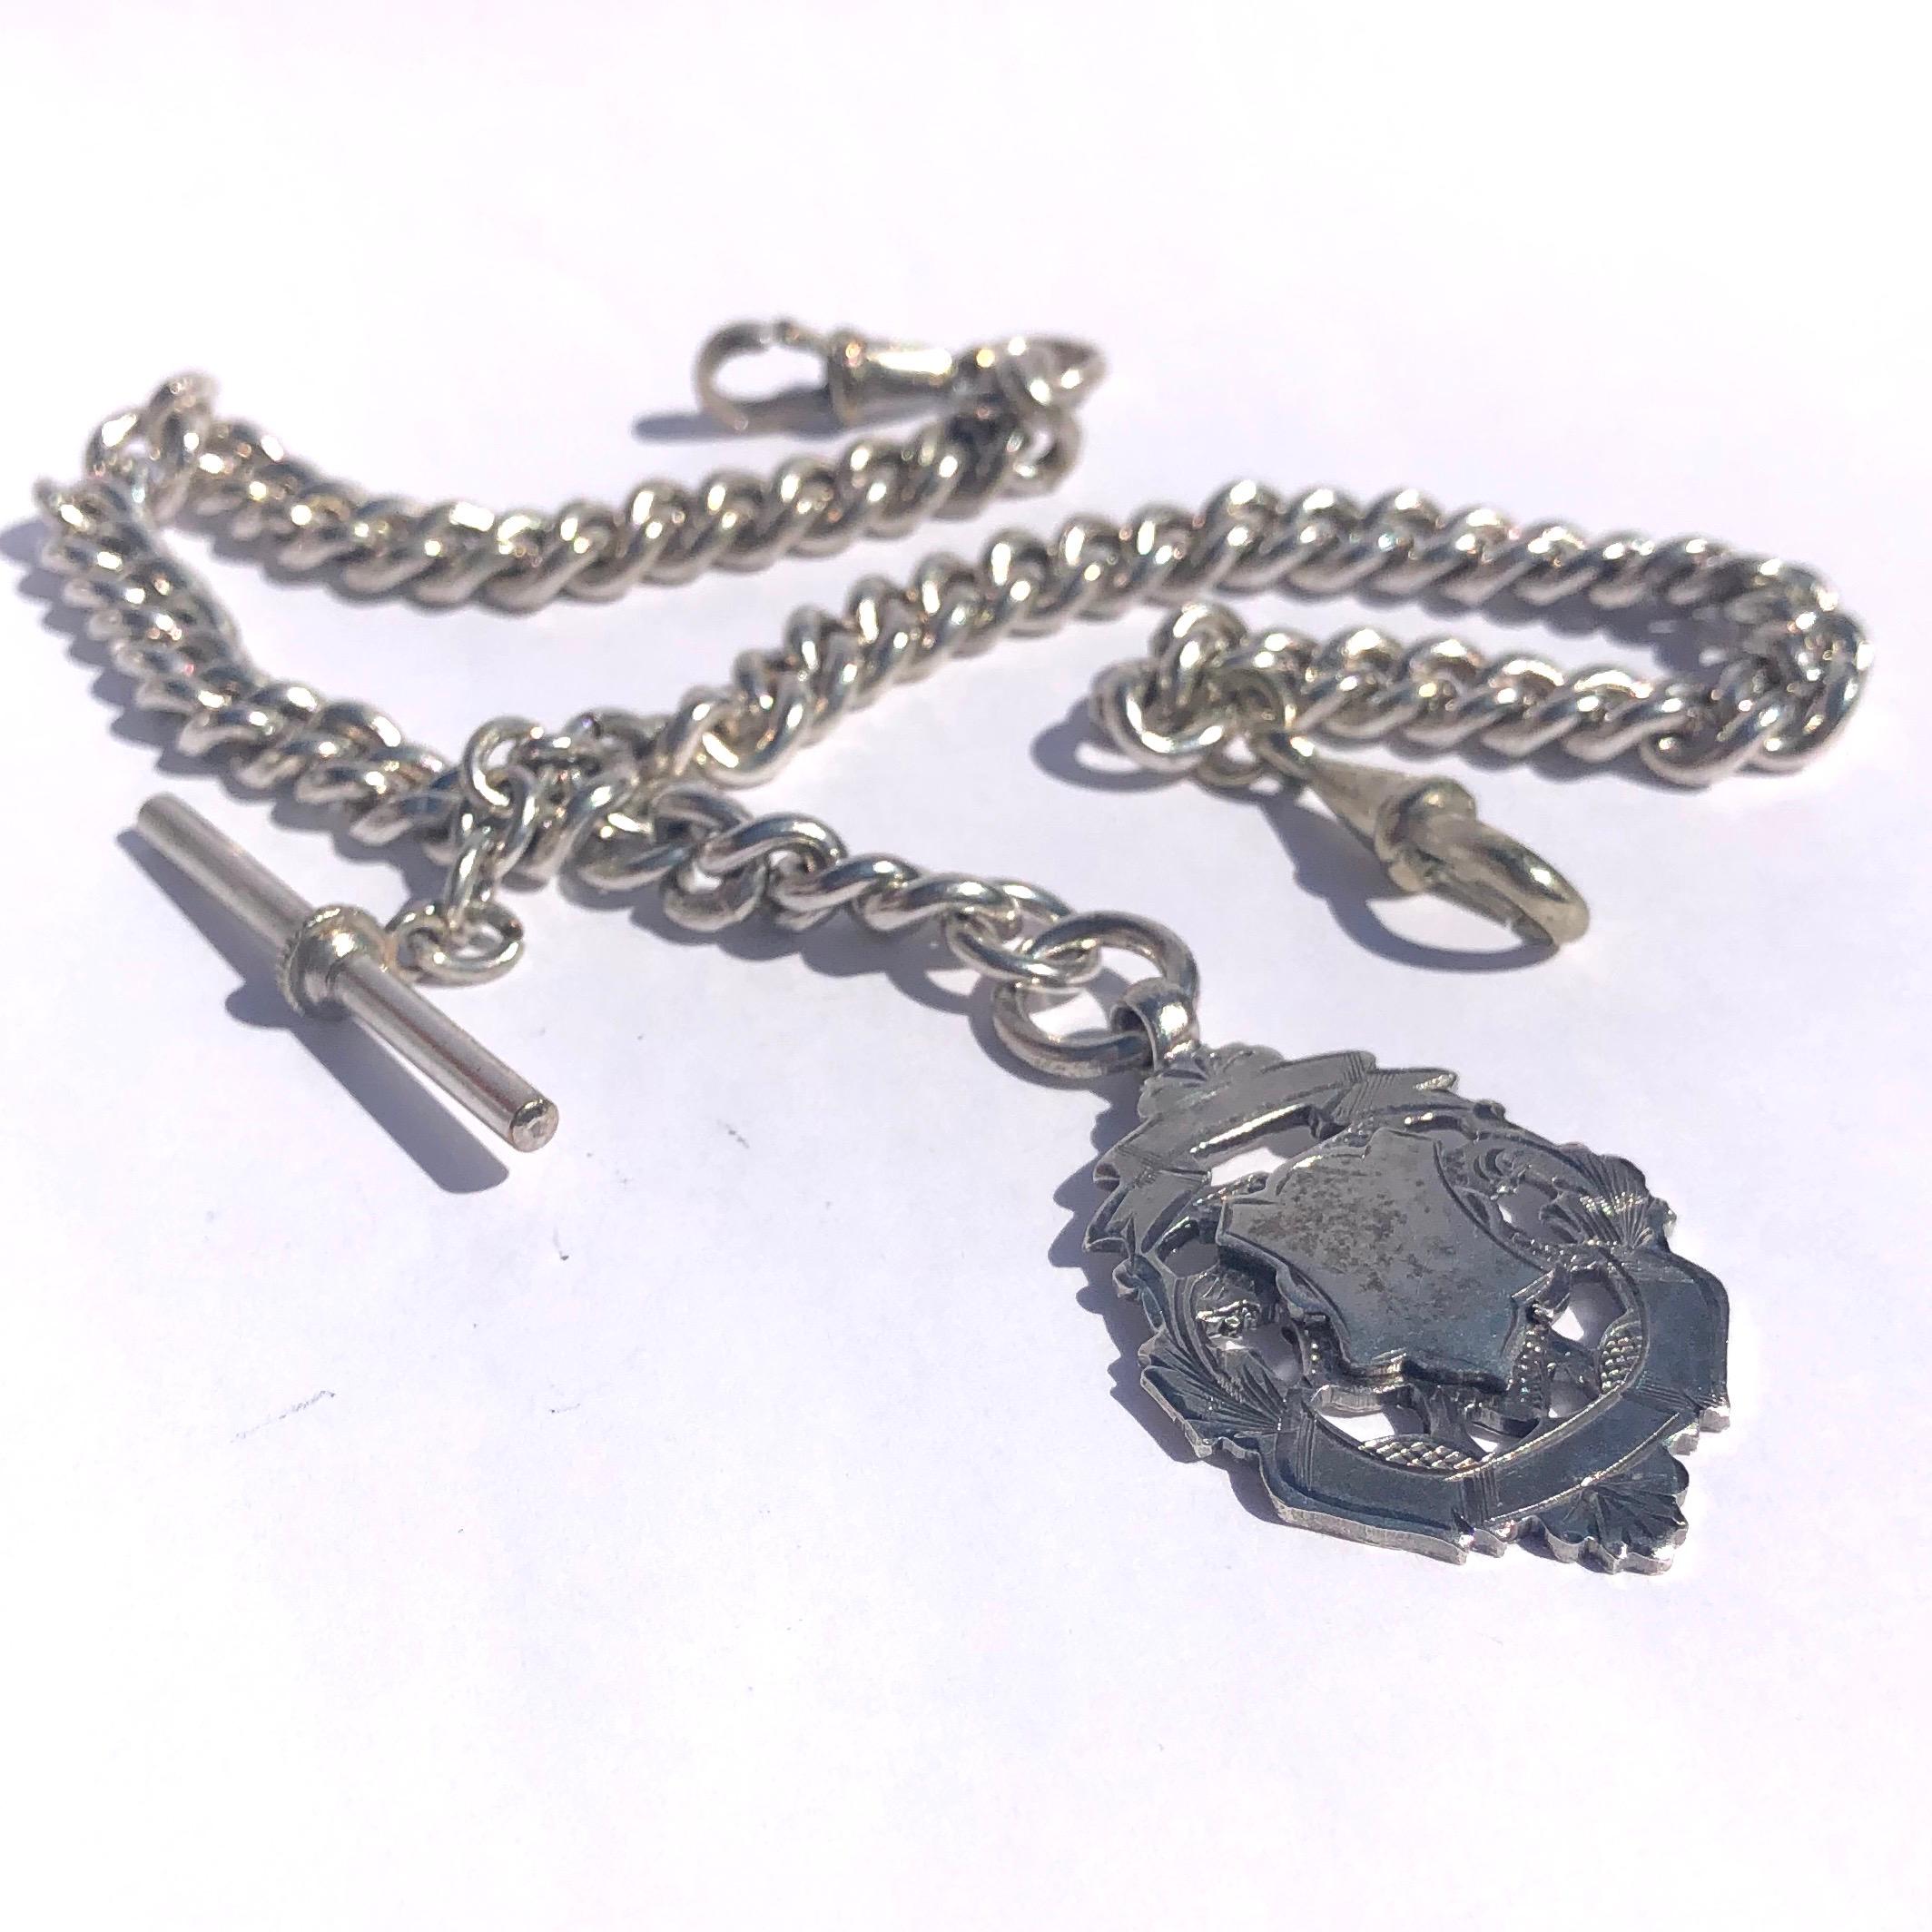 An Albert chain is an essential in any gents wardrobe. This particular Albert  is simple with two dog clips with a medallion and a t-bar in the middle. 

Length: 30.5cm 

Weight: 49.8g